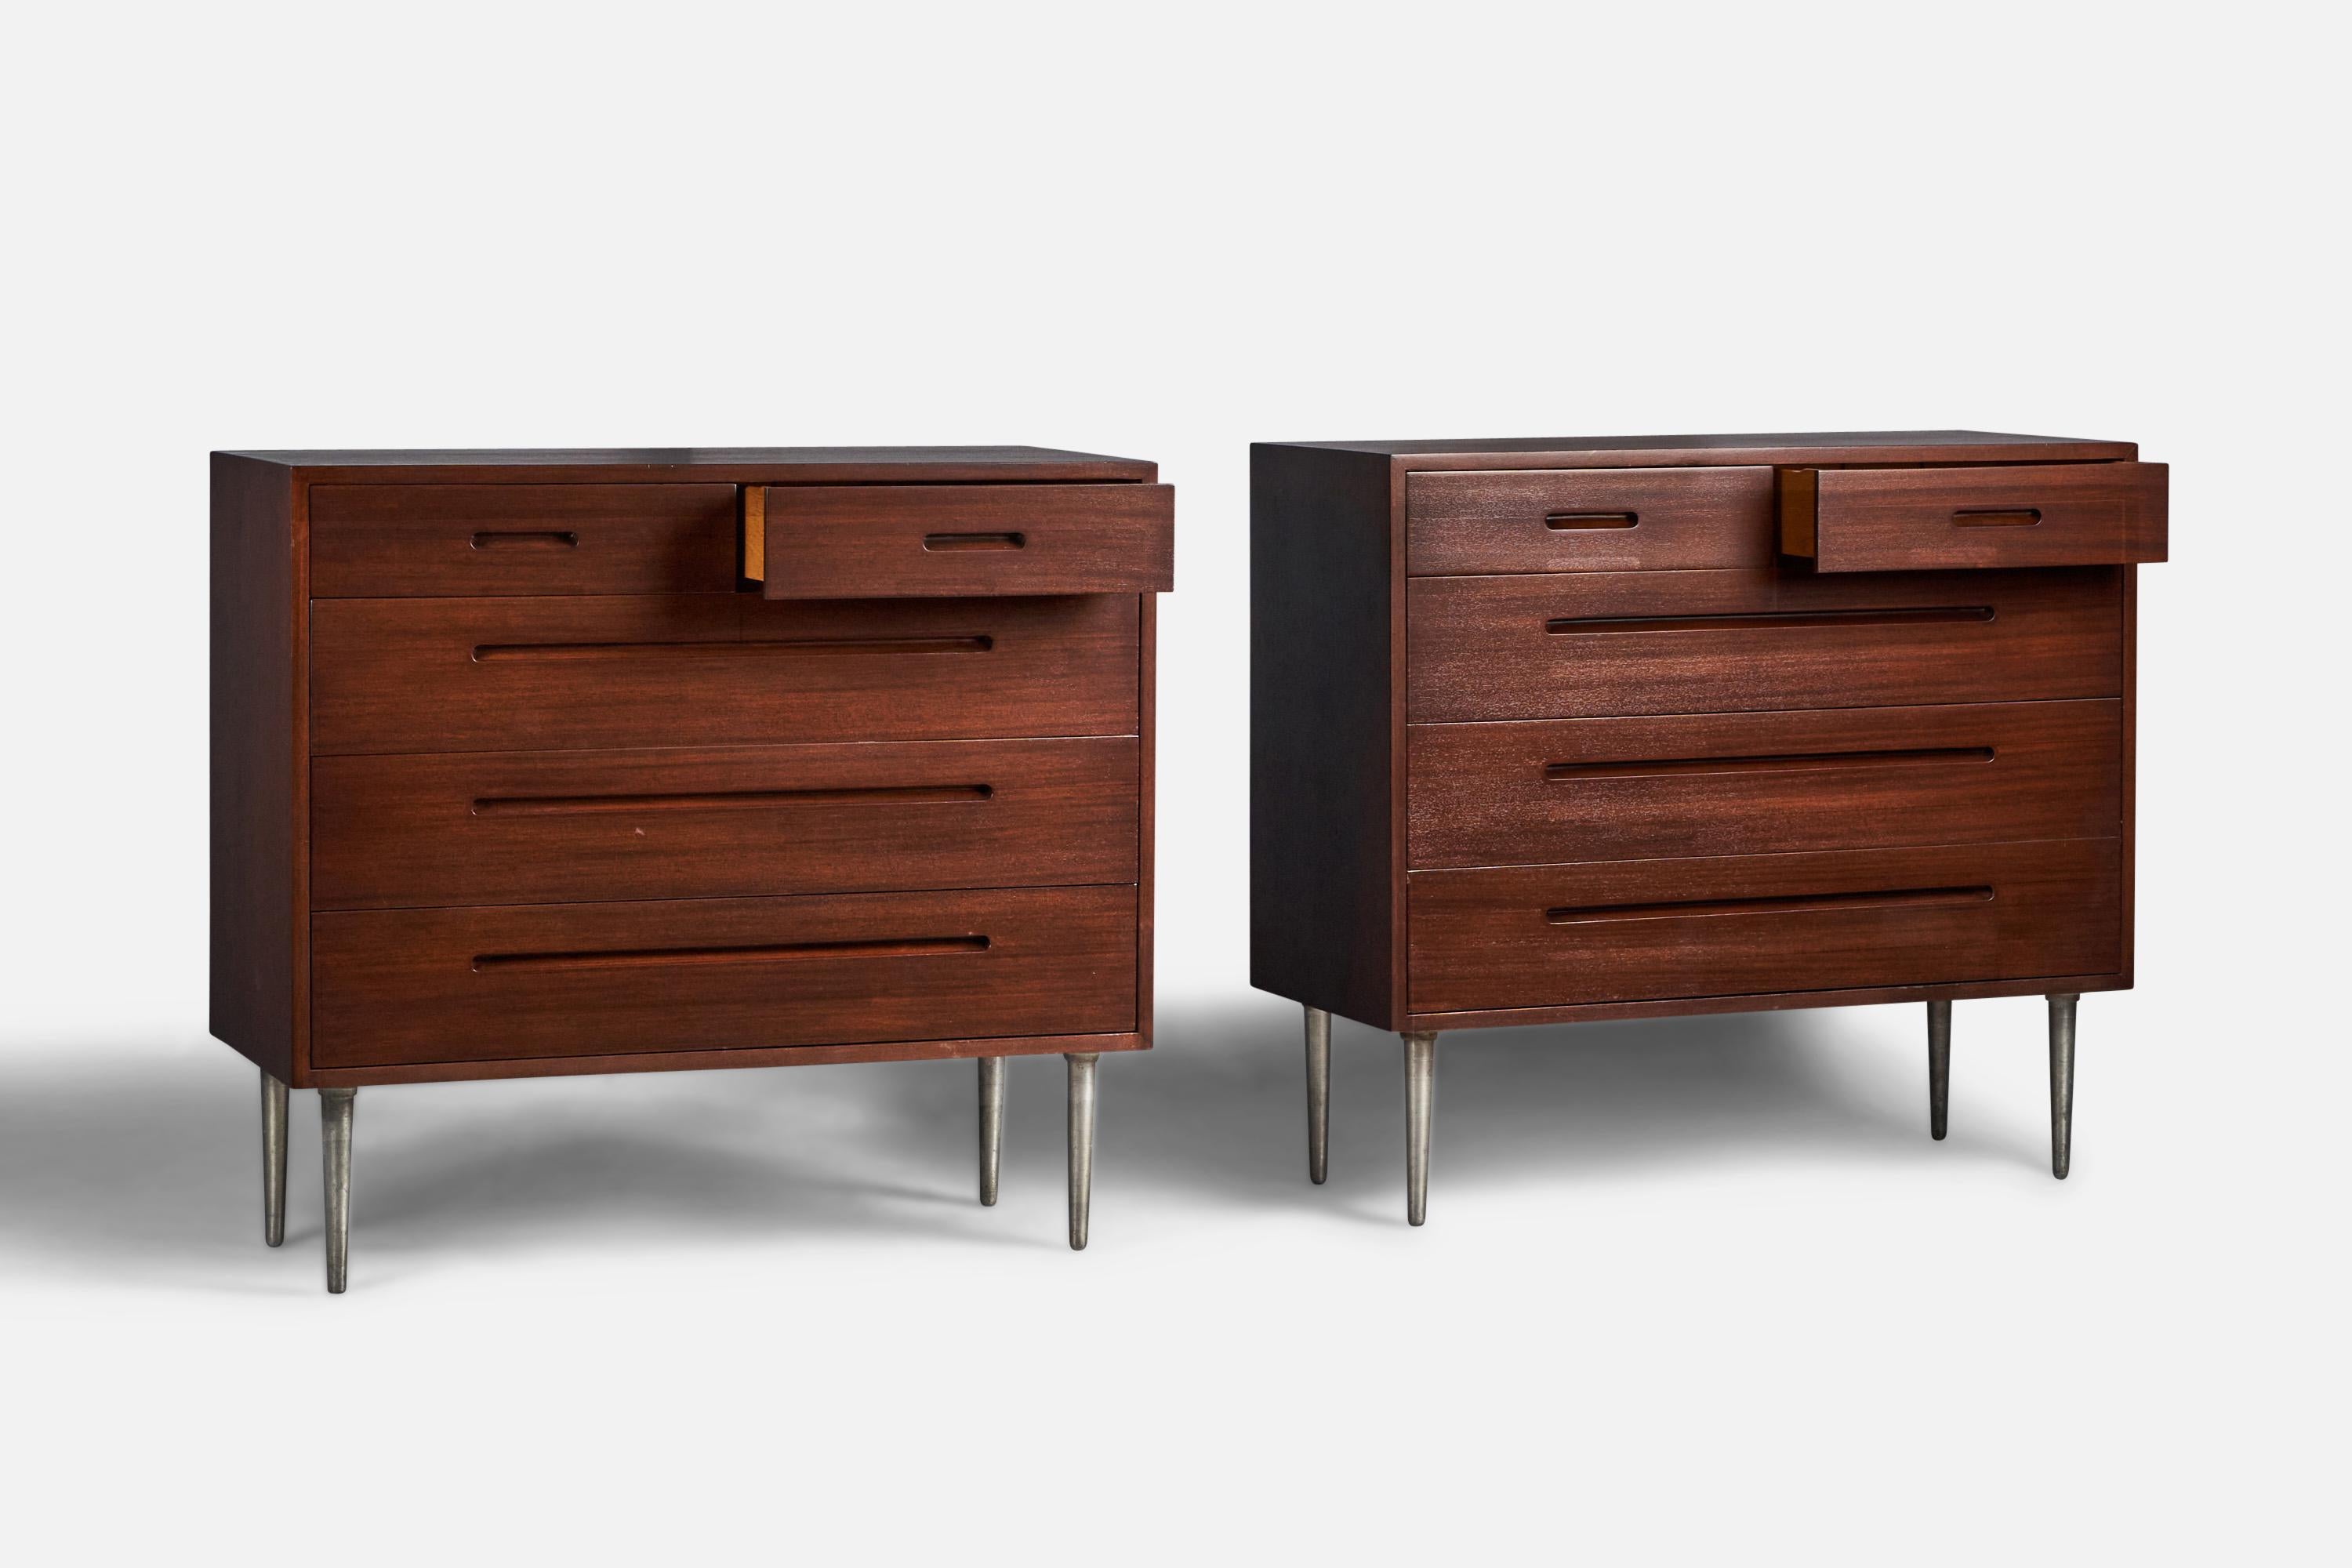 A pair of rare modernist cabinets or dressers. In stained walnut, legs in steel. Designed by Edward Wormley. Produced by Dunbar, Berne, Indiana, 1950s. 

Other designers of the period include Paul Frankl, Tommi Parzinger, Milo Baughman, and Harvey